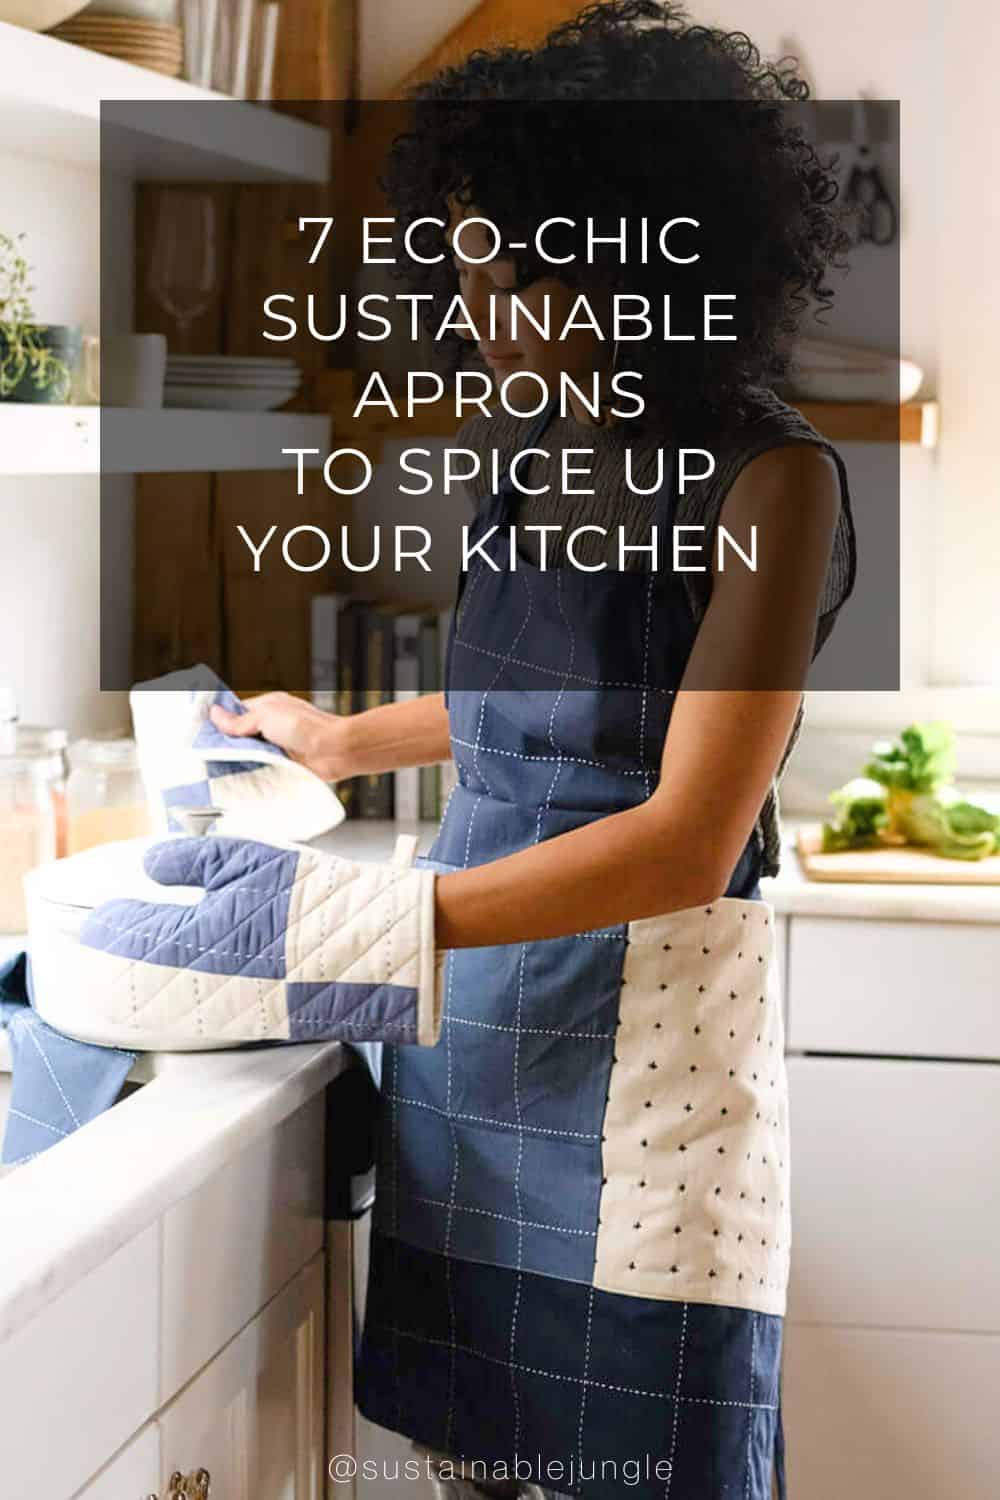 7 Eco-Chic Sustainable Aprons to Spice Up Your Kitchen Image by Anchal #sustainableaprons #ecofriendlyaprons #organicaprons #bestmaterialforaprons #sustainablecookingapronsforwomen #sustainablejungle